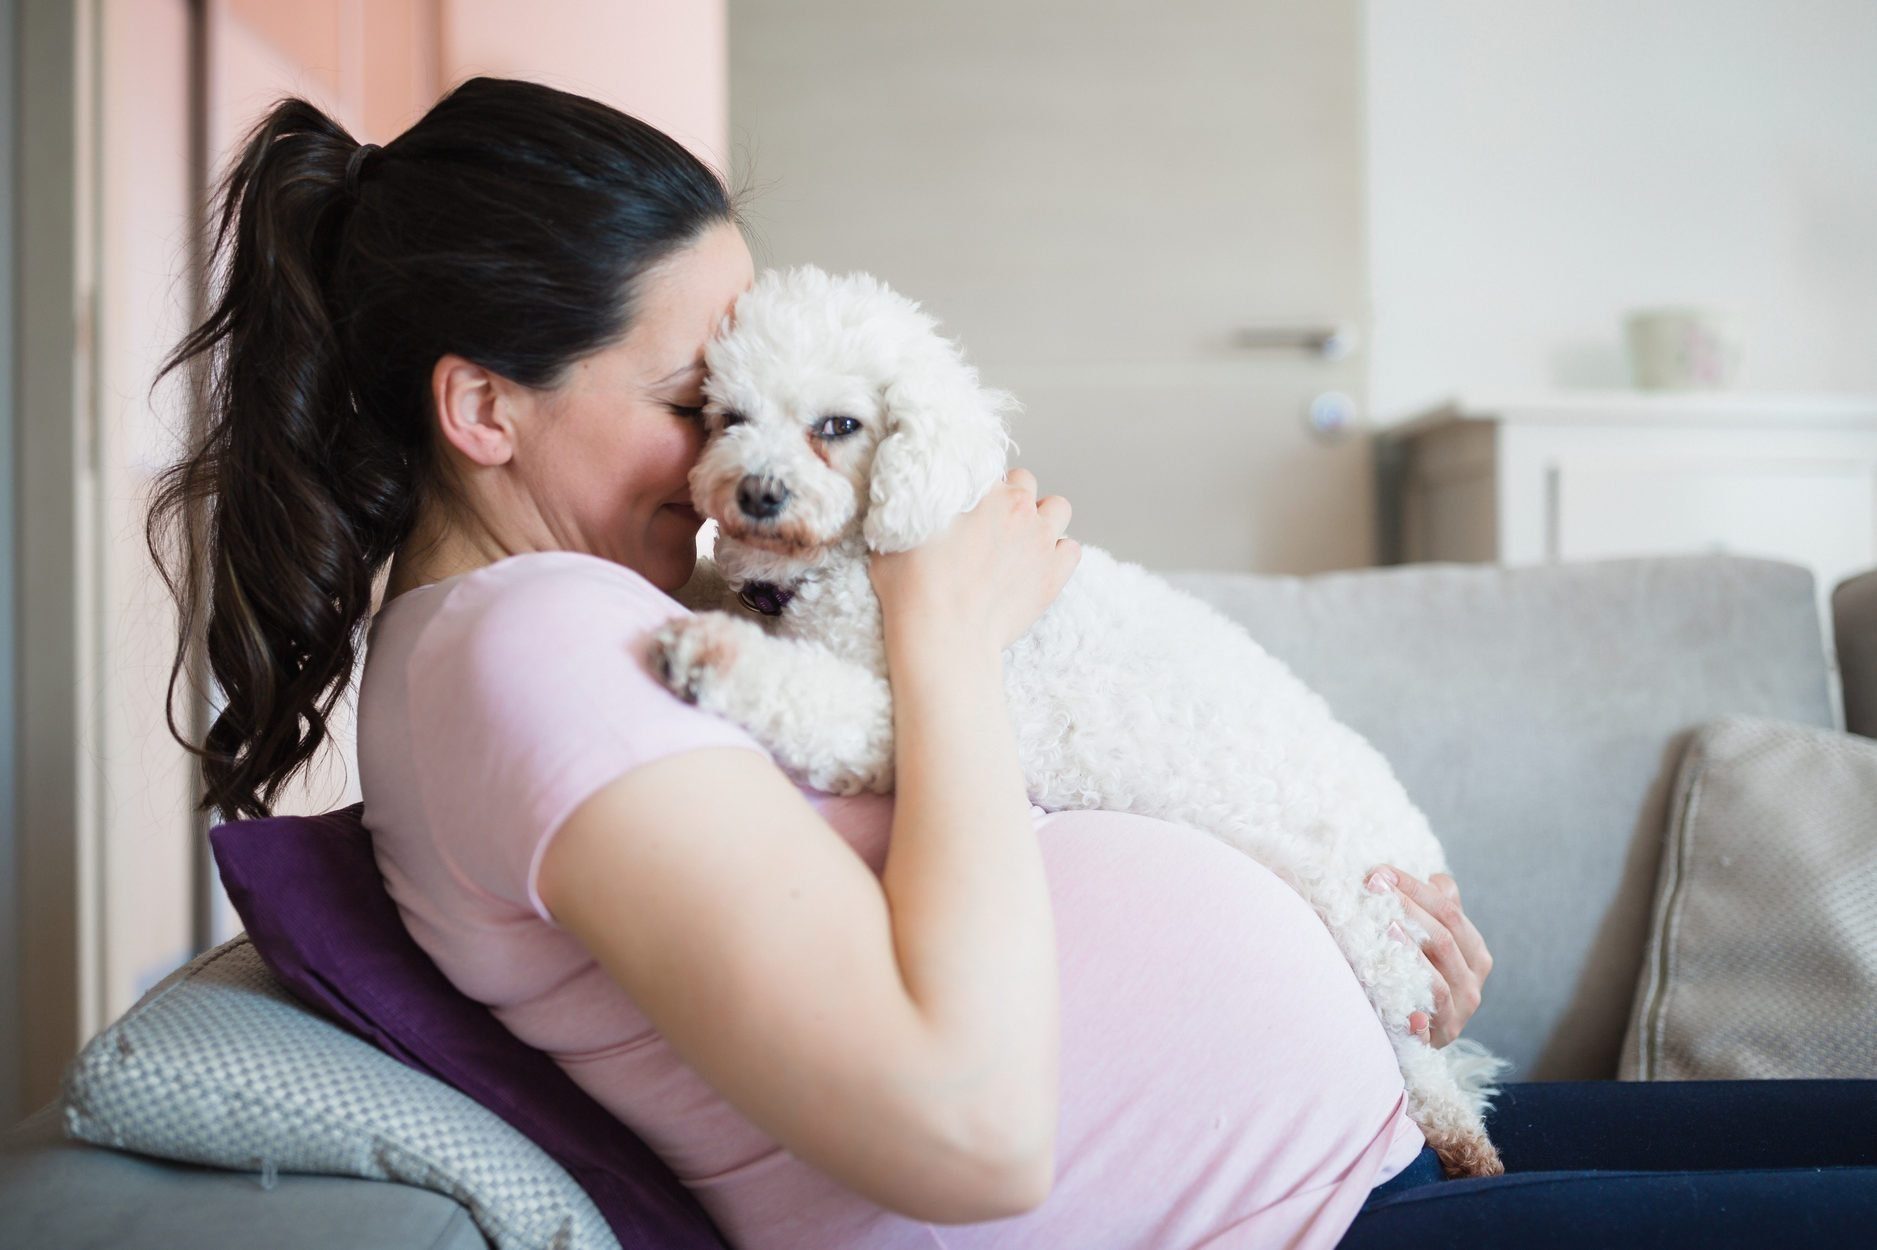 Most affectionate dog breeds - Pregnant woman having fun with her dog